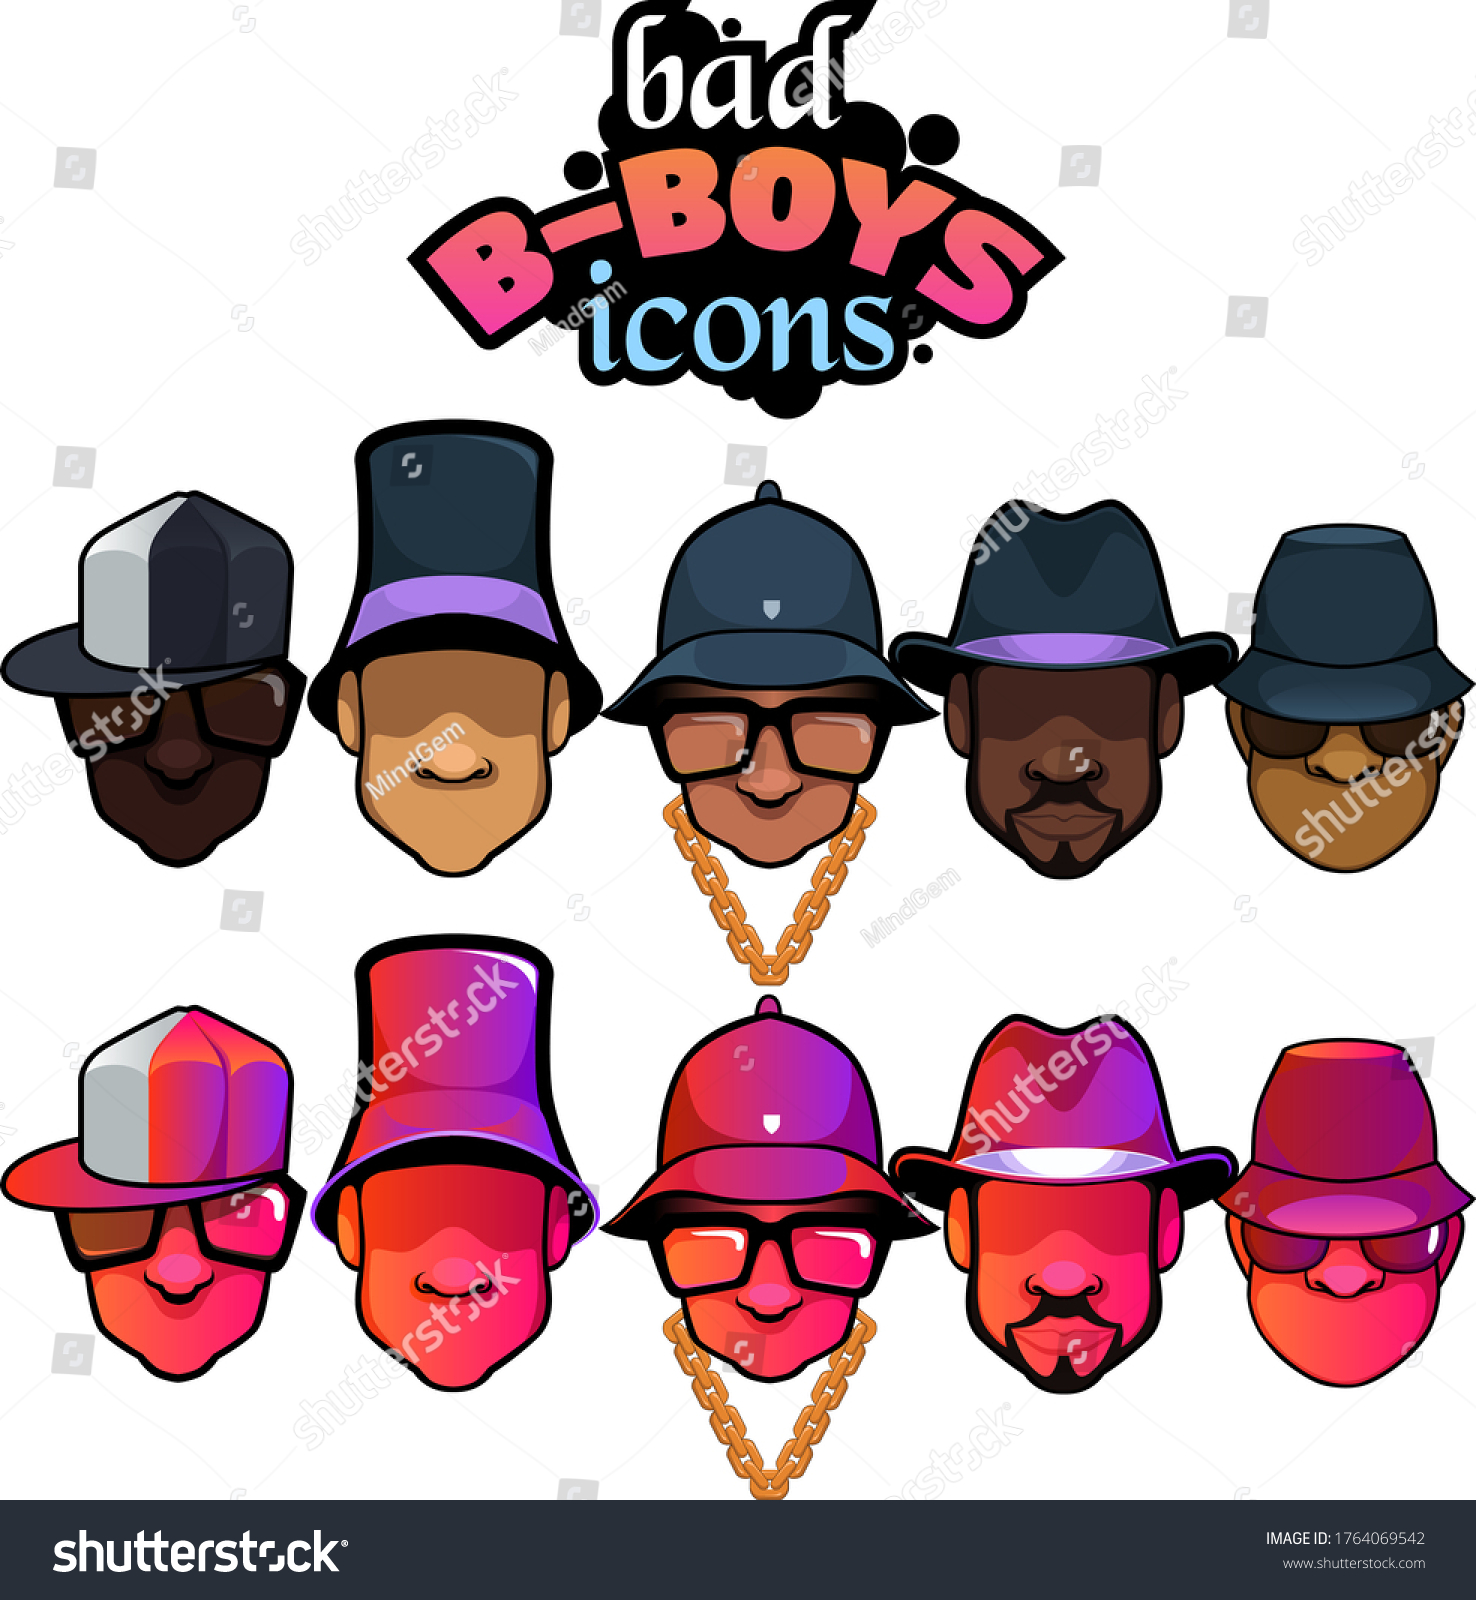 SVG of Bad B-boys For Life. A set of 5 cool bboys with different iconic hats from the 1980s.  svg